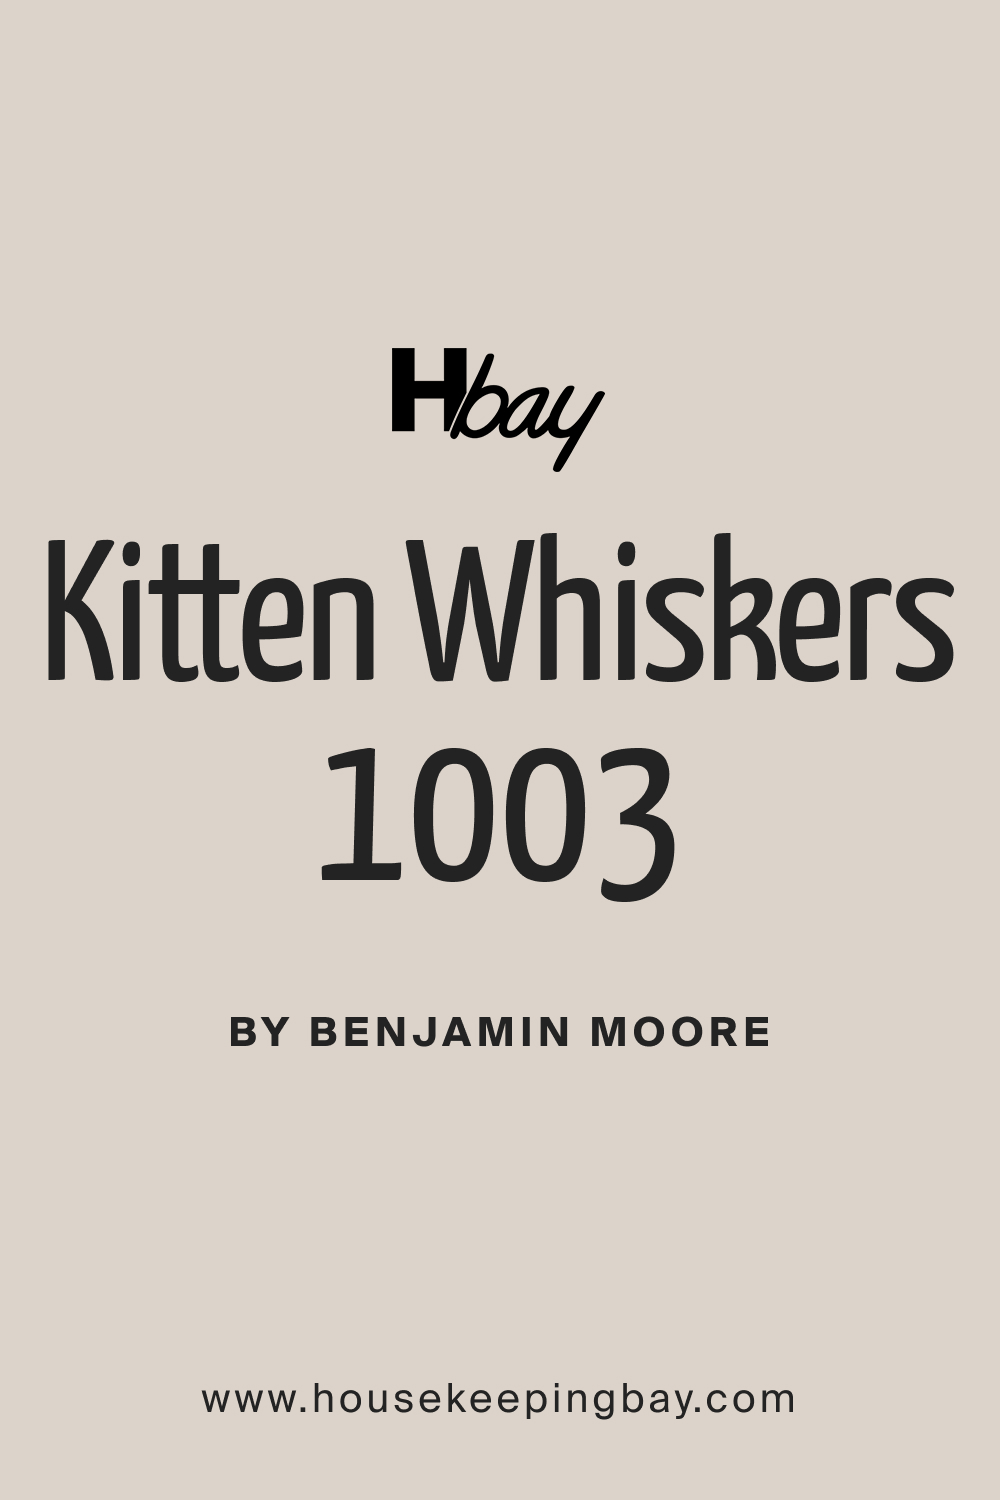 What Color Is BM Kitten Whiskers 1003?